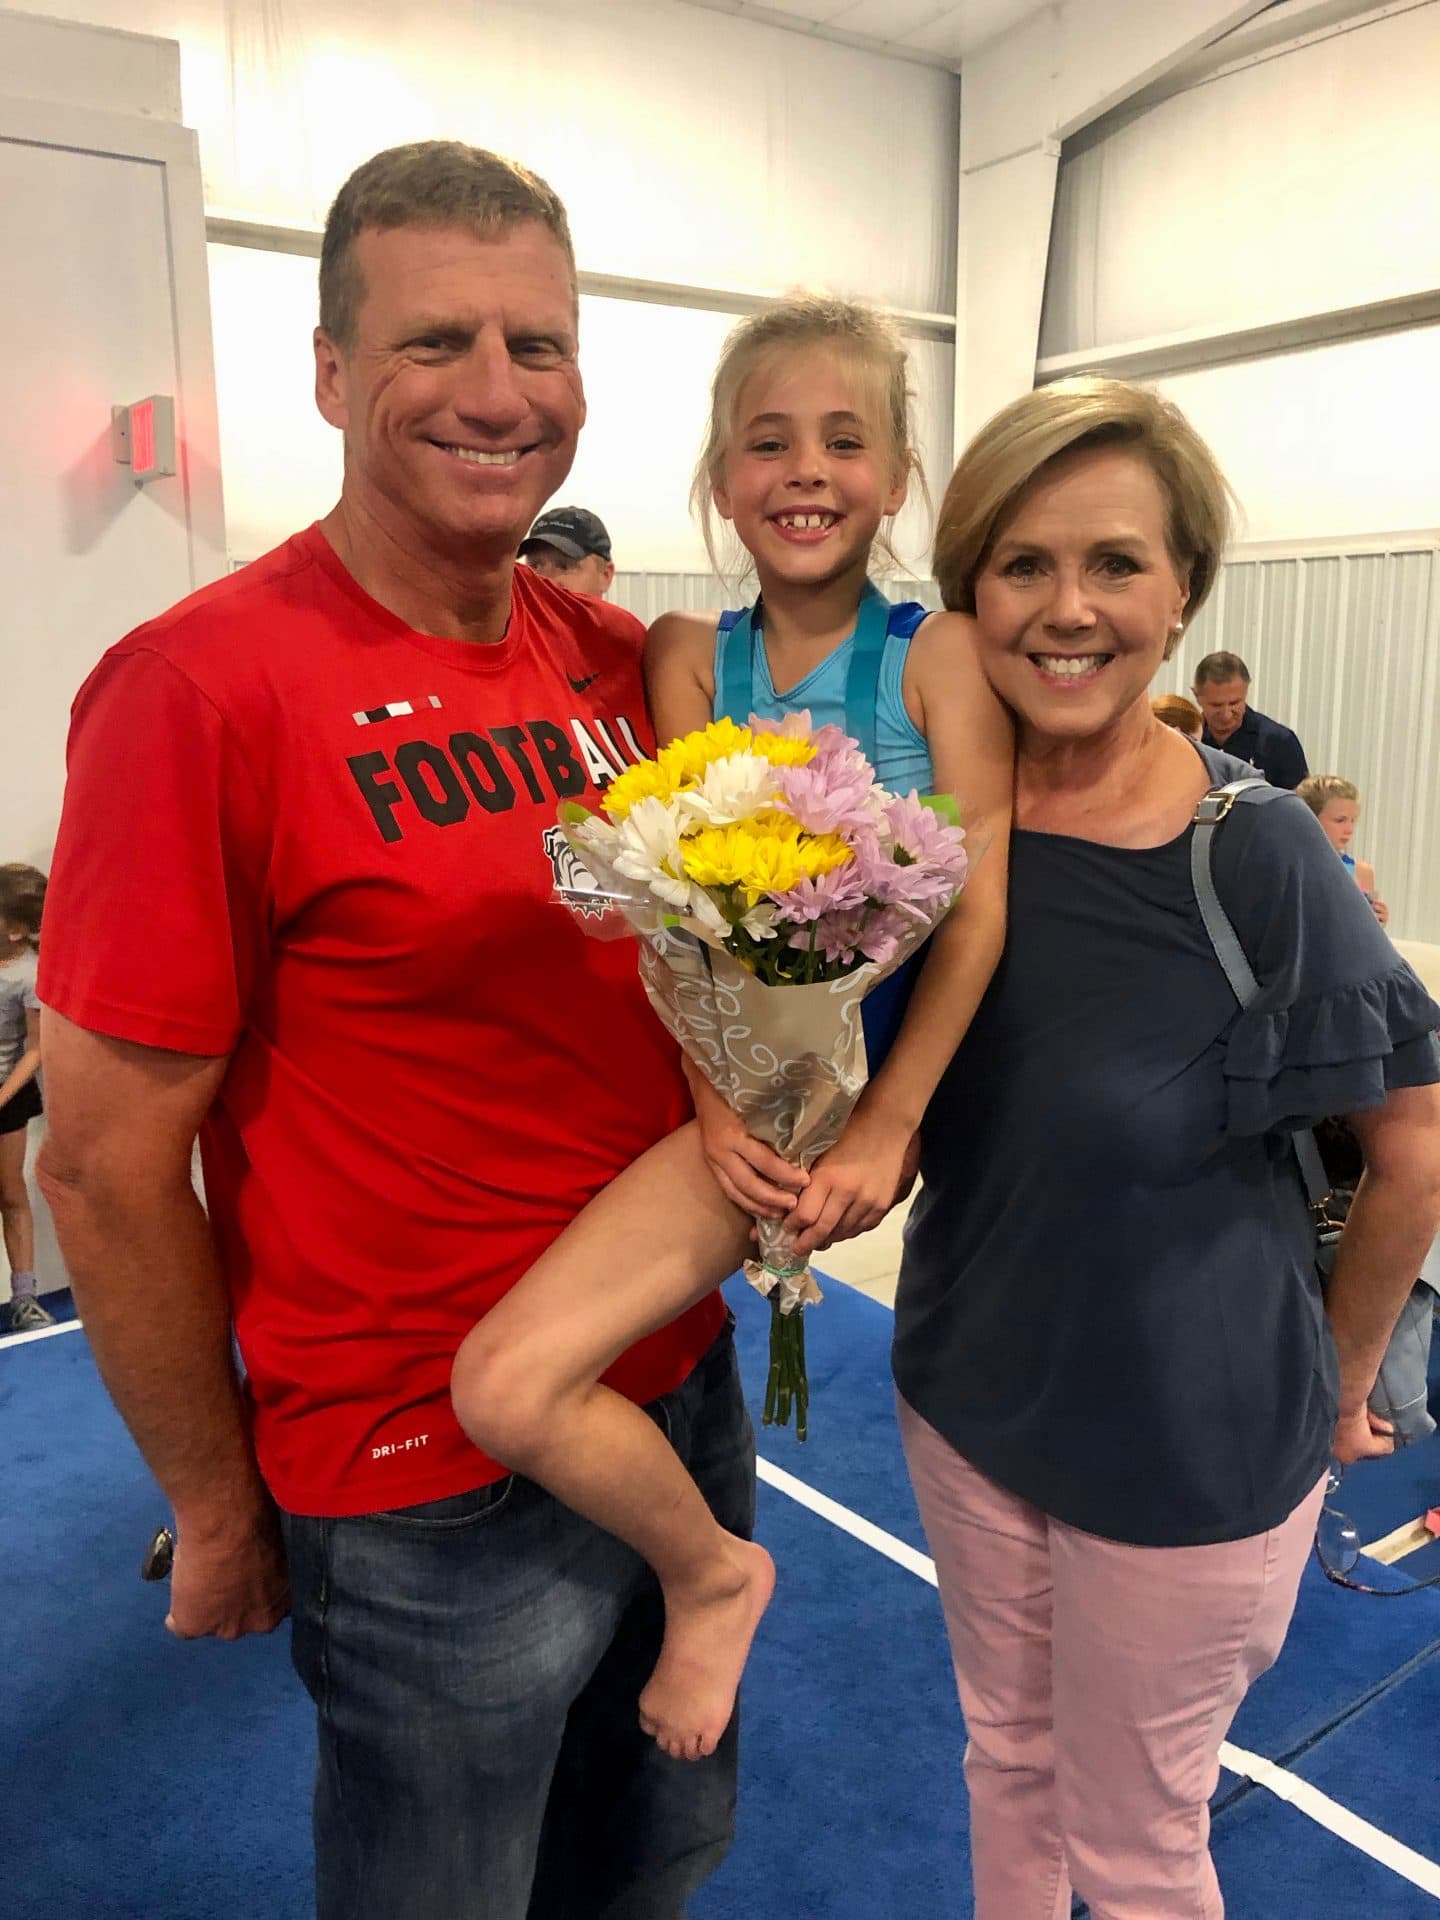 family support at gymnastics